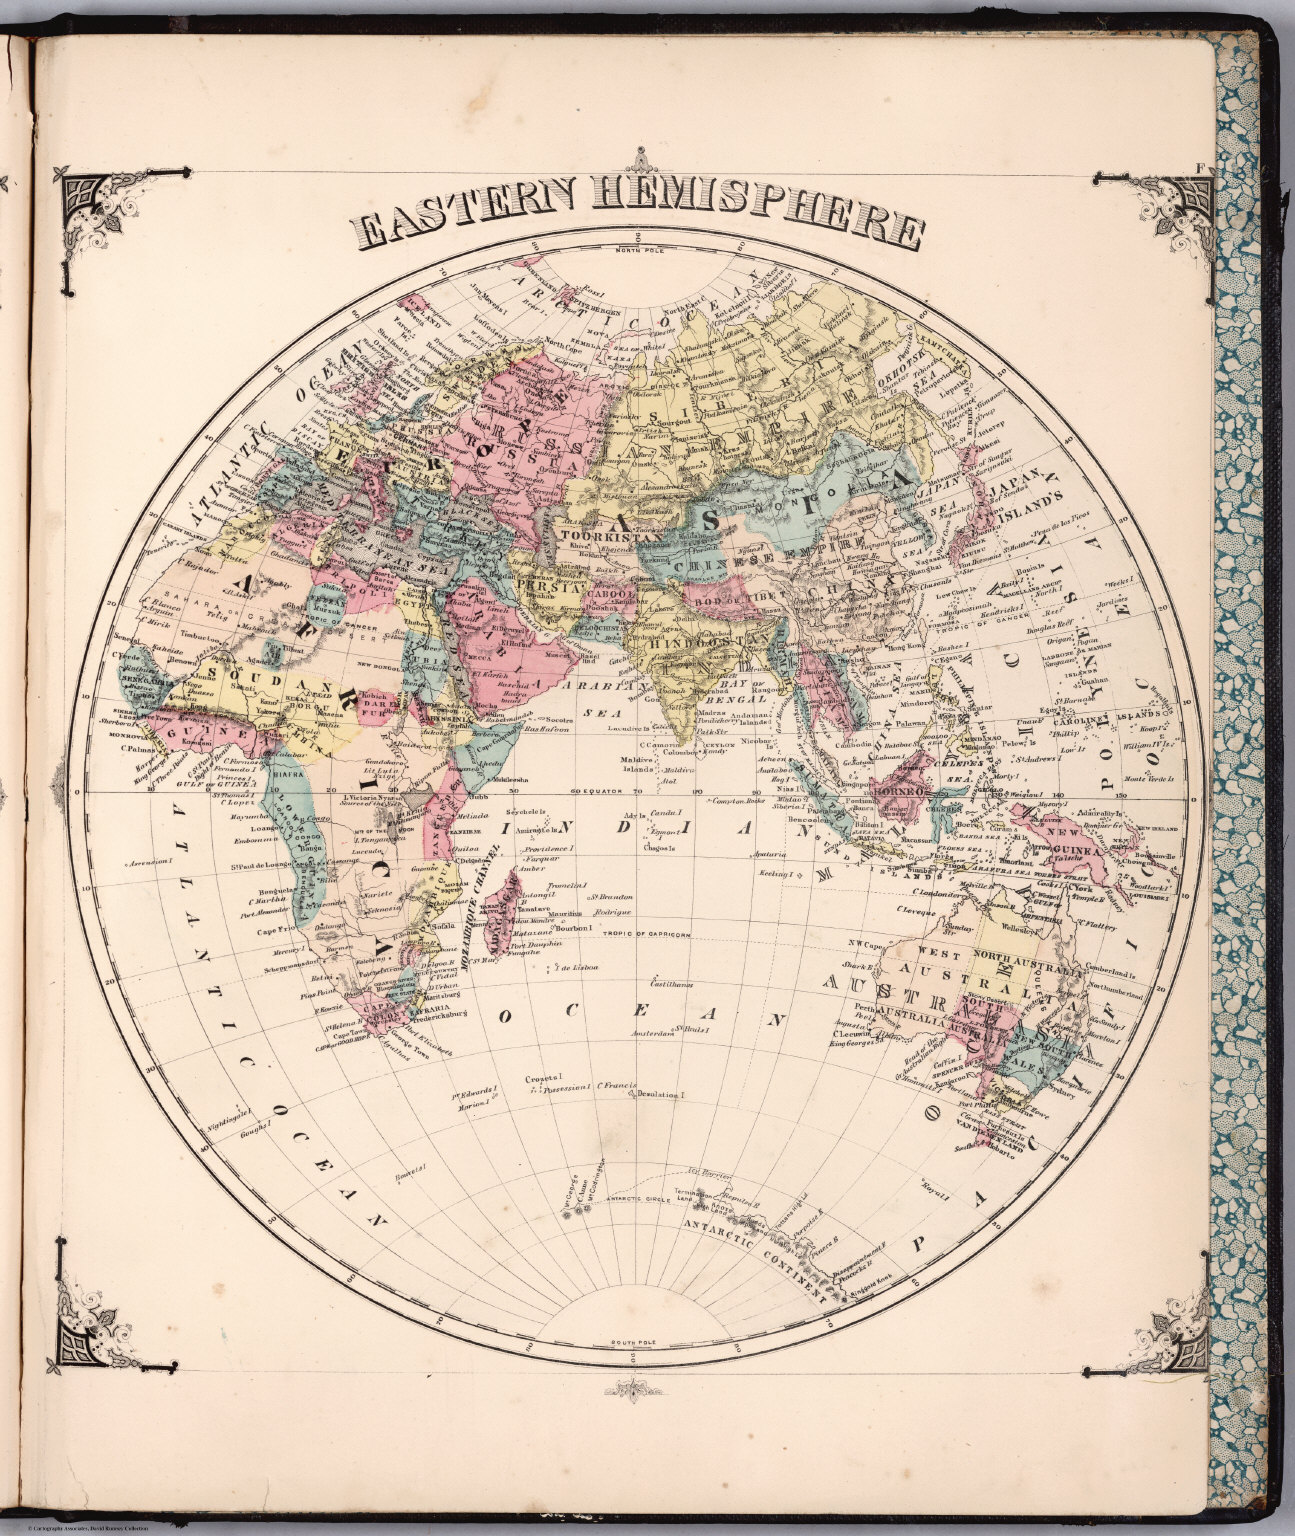 Eastern Hemisphere from 1856 published by J.H. Colton And Co. 172 William St. New York. I am impressed by the perspective of the world that is neither Europe nor America. Source: David Rumsey Map Collection